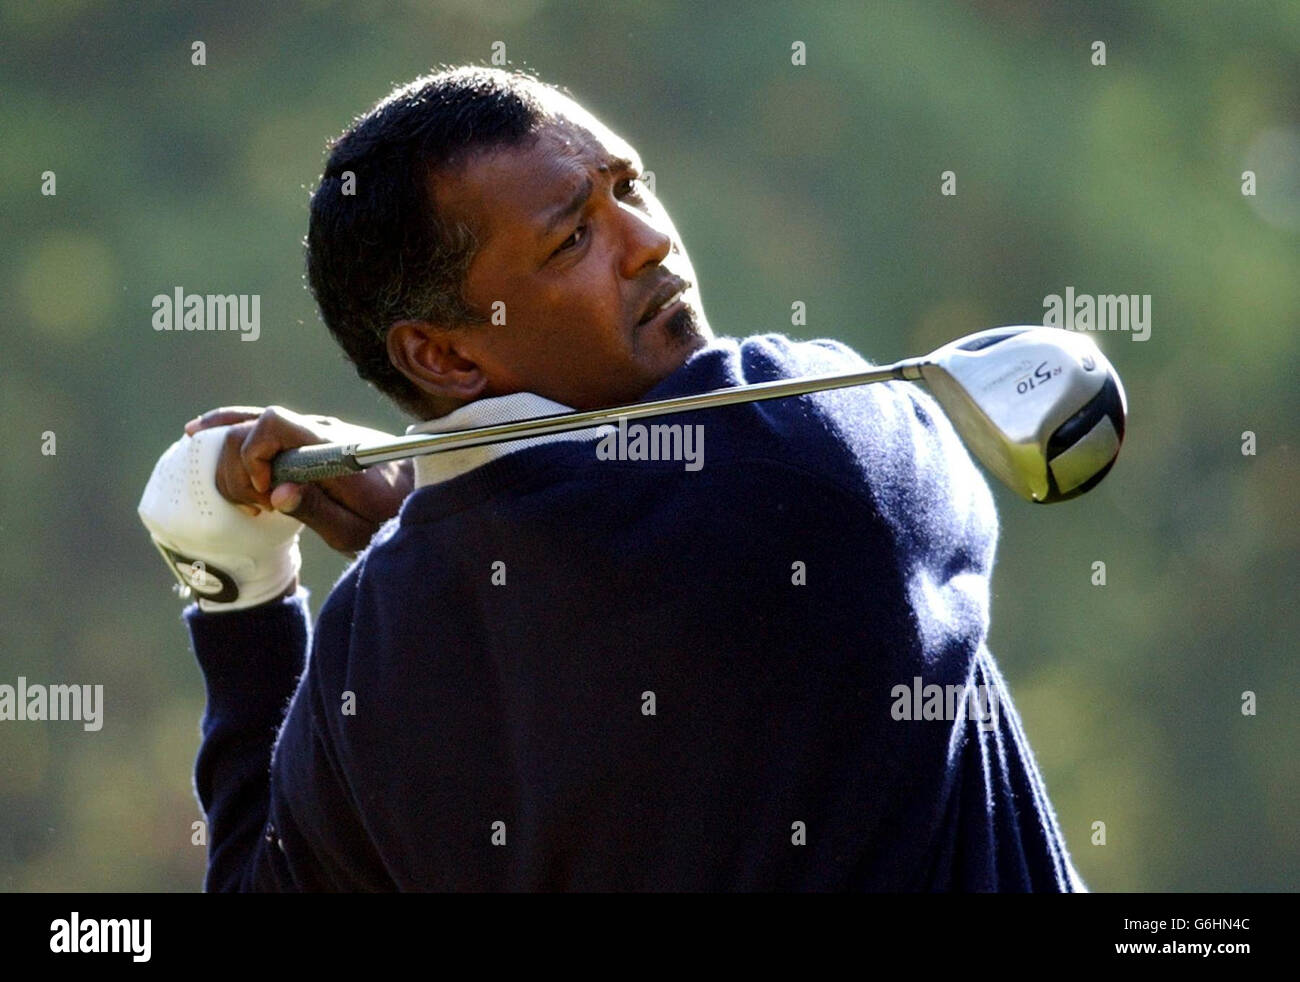 Fiji's Vijay Singh tees off the 12th hole, during the HSBC World Matchplay Championship Pro-am at the Wentworth Golf Club, Virginia Water. Stock Photo